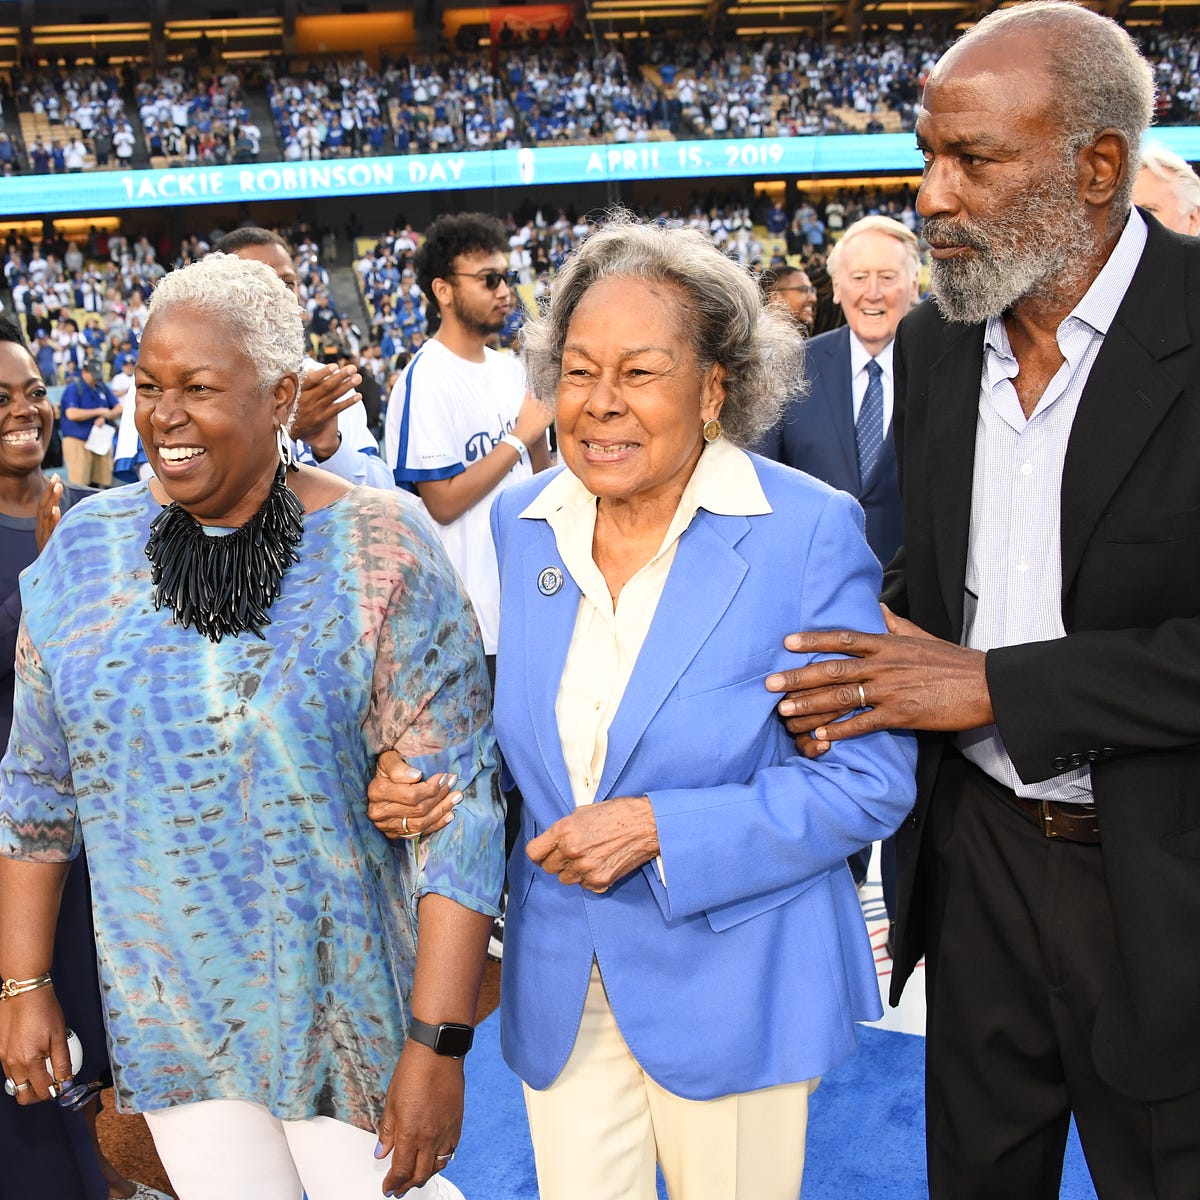 Jackie Robinson's legacy lives on 75 years after he broke barriers, by  Rowan Kavner